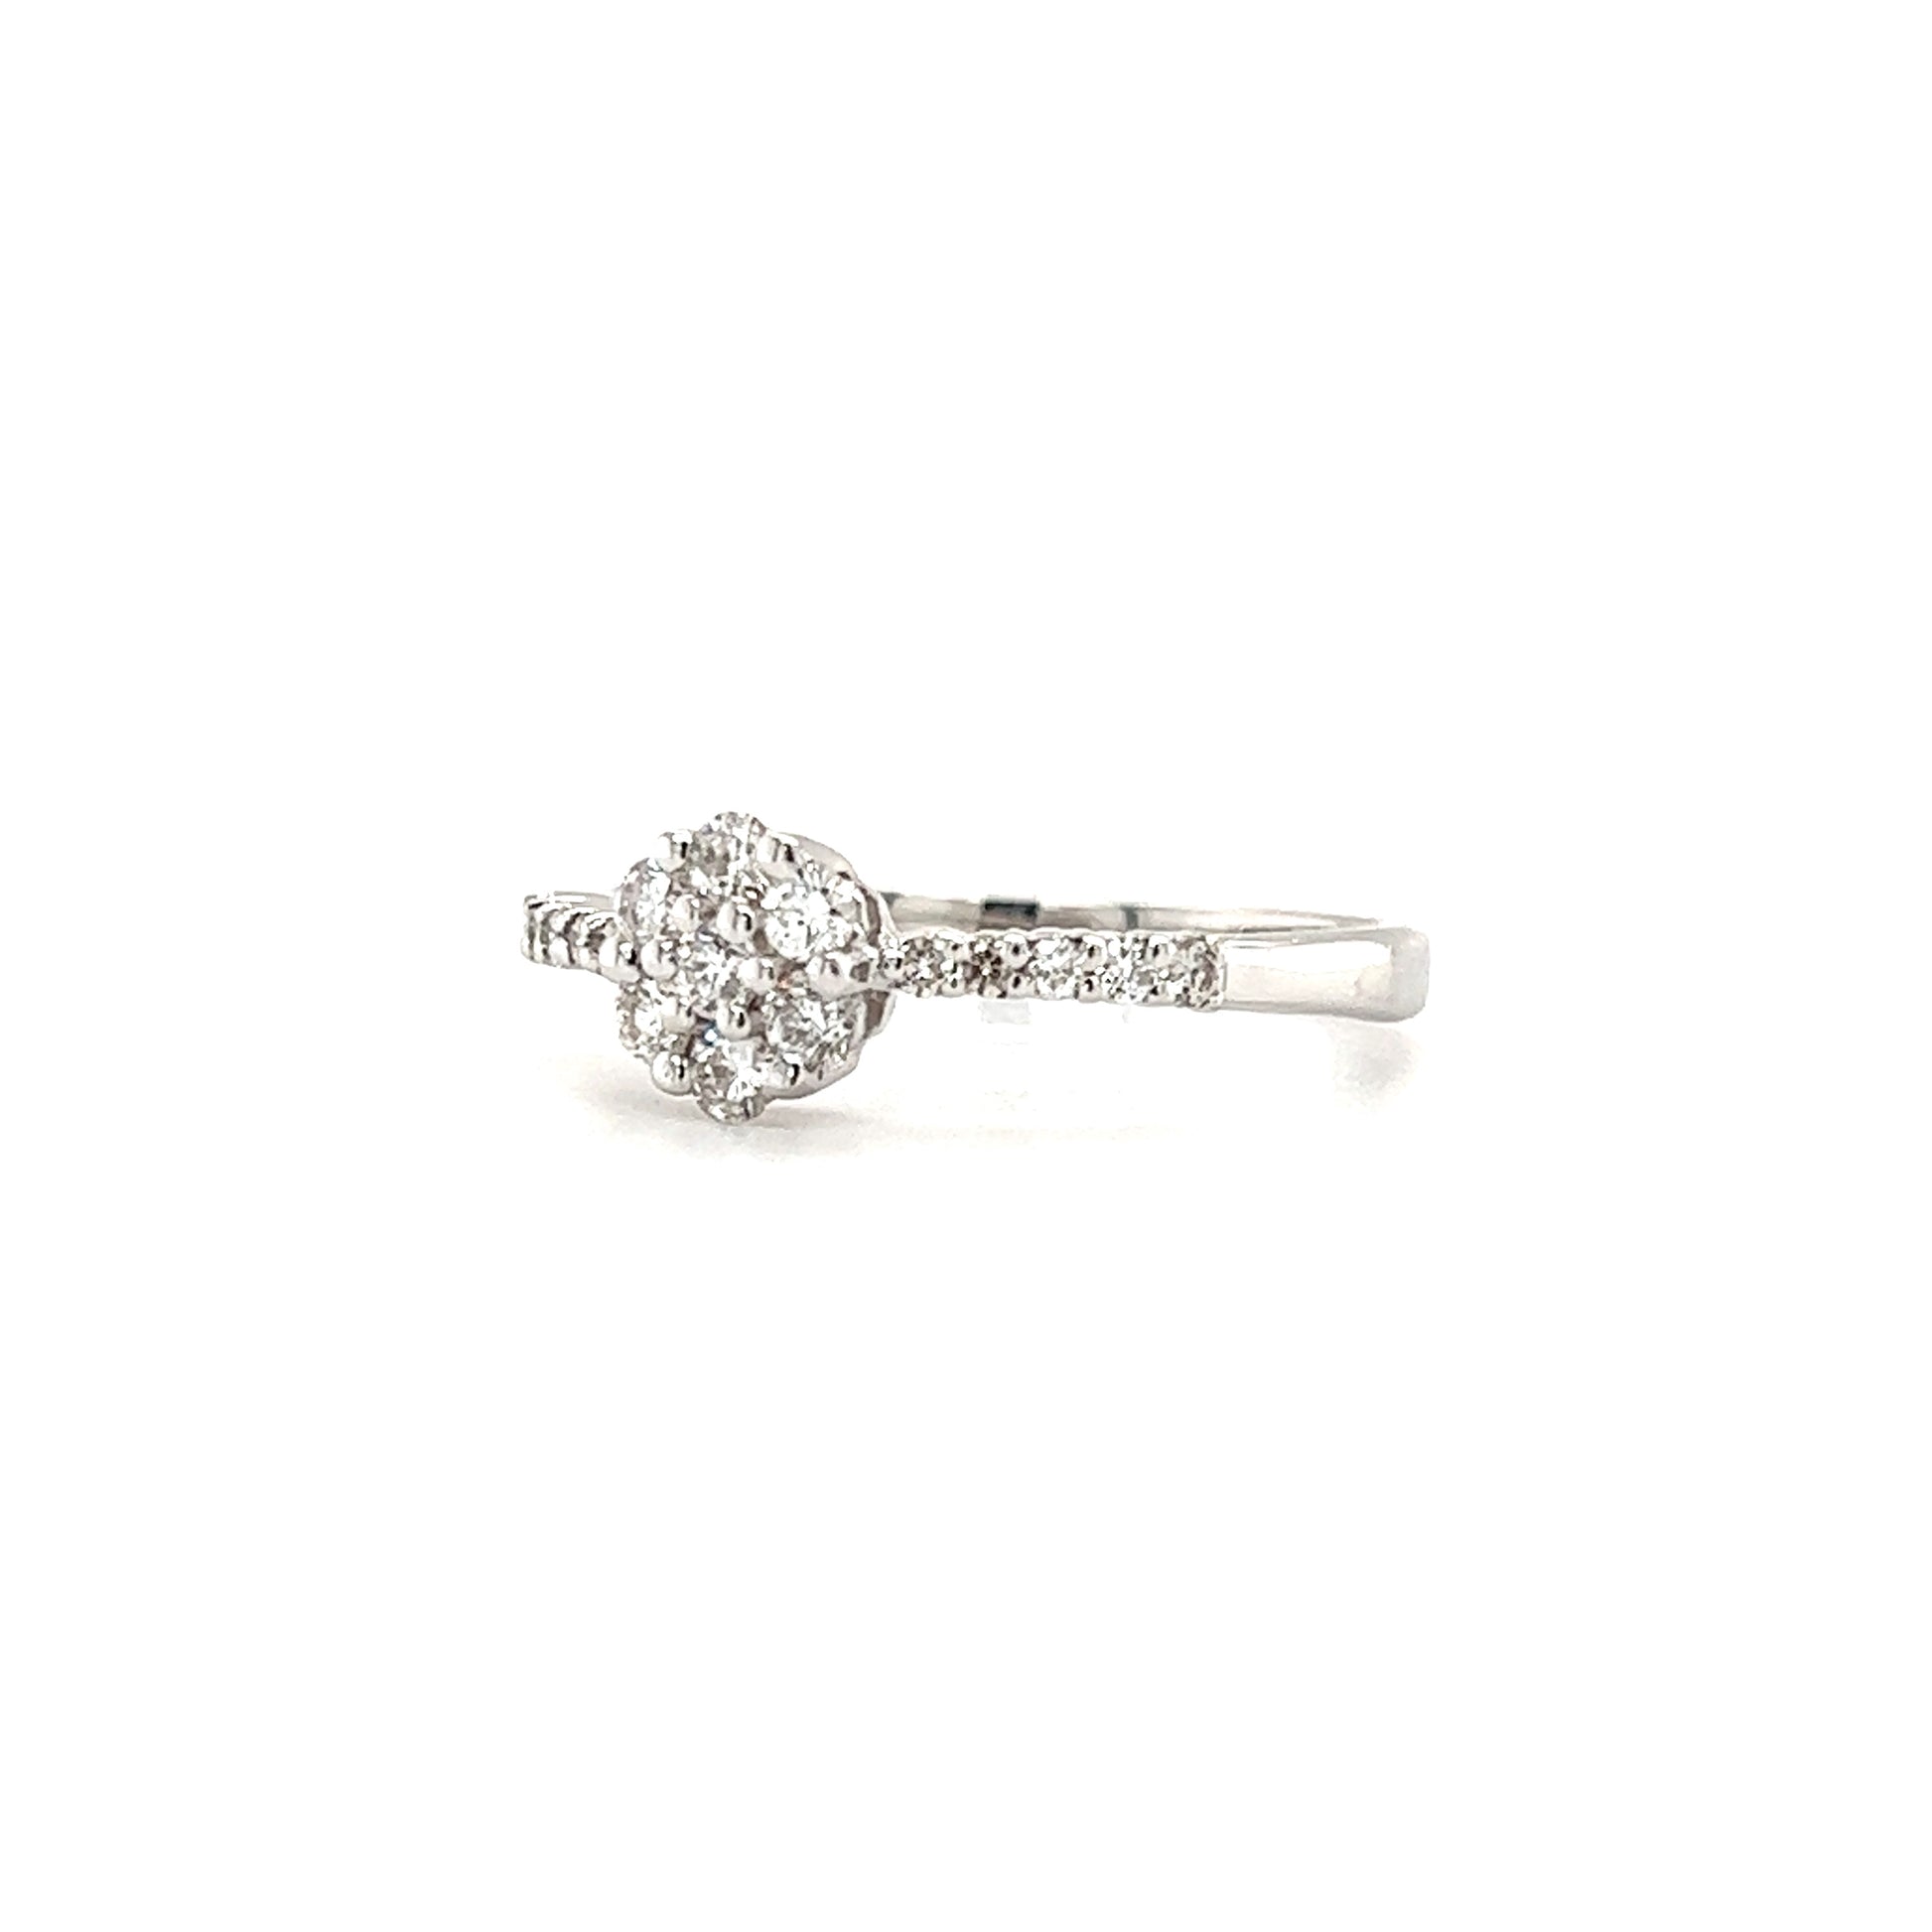 Floral Diamond Ring with 0.36ctw of Diamonds in 14K White Gold Right Side View